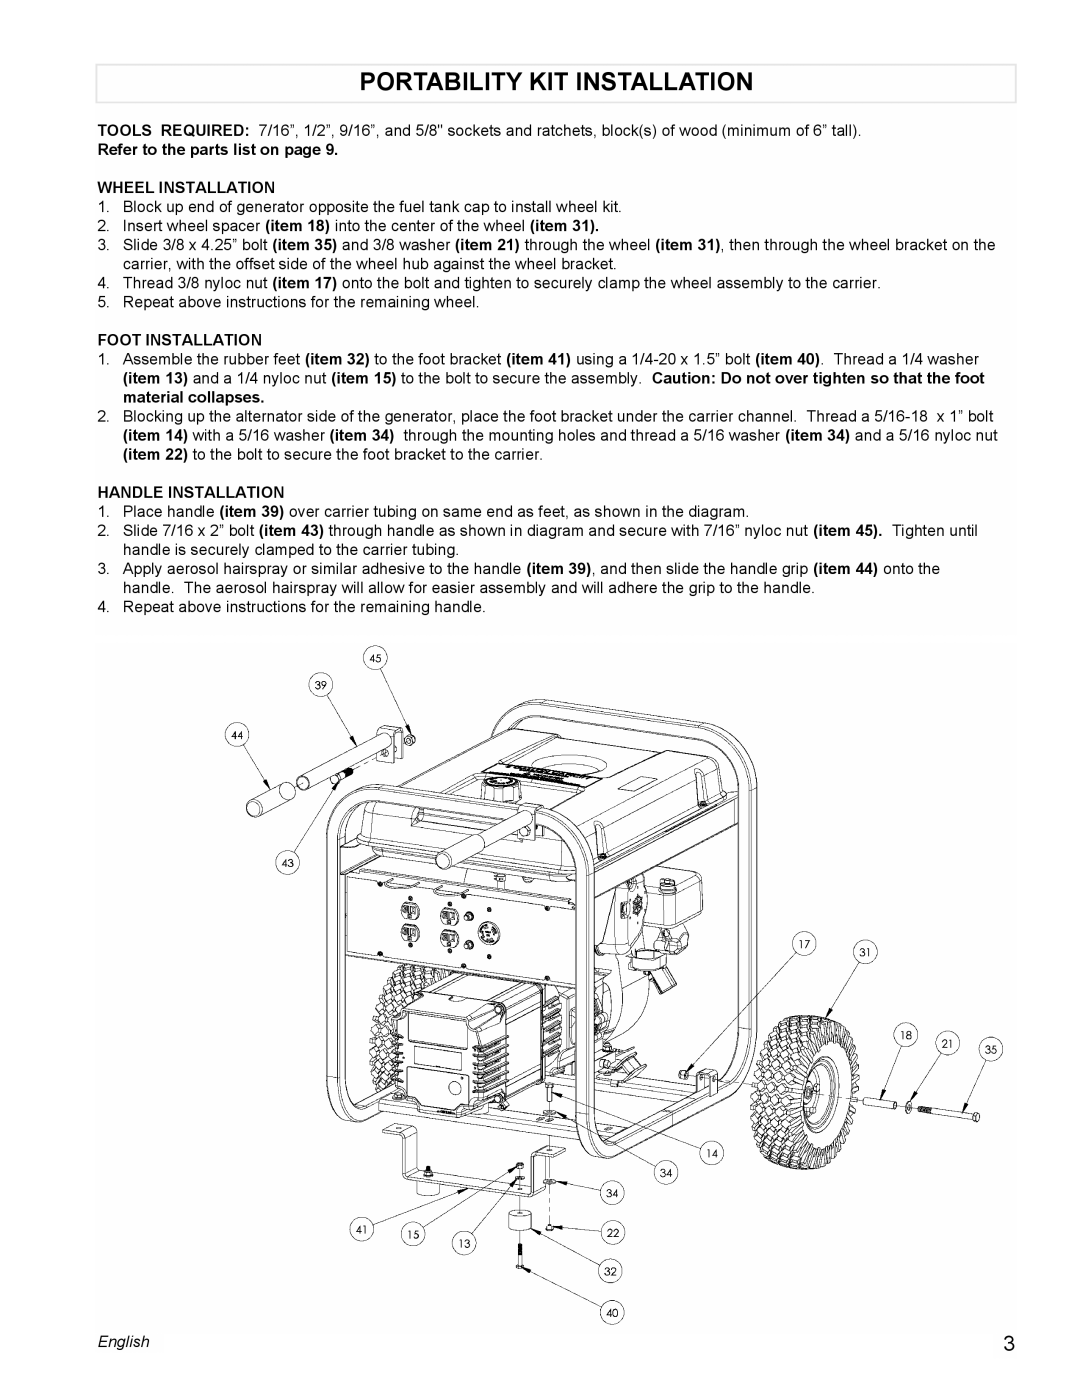 Powermate PMA525500 Portability Kit Installation, Refer to the parts list on page, Wheel Installation, Foot Installation 